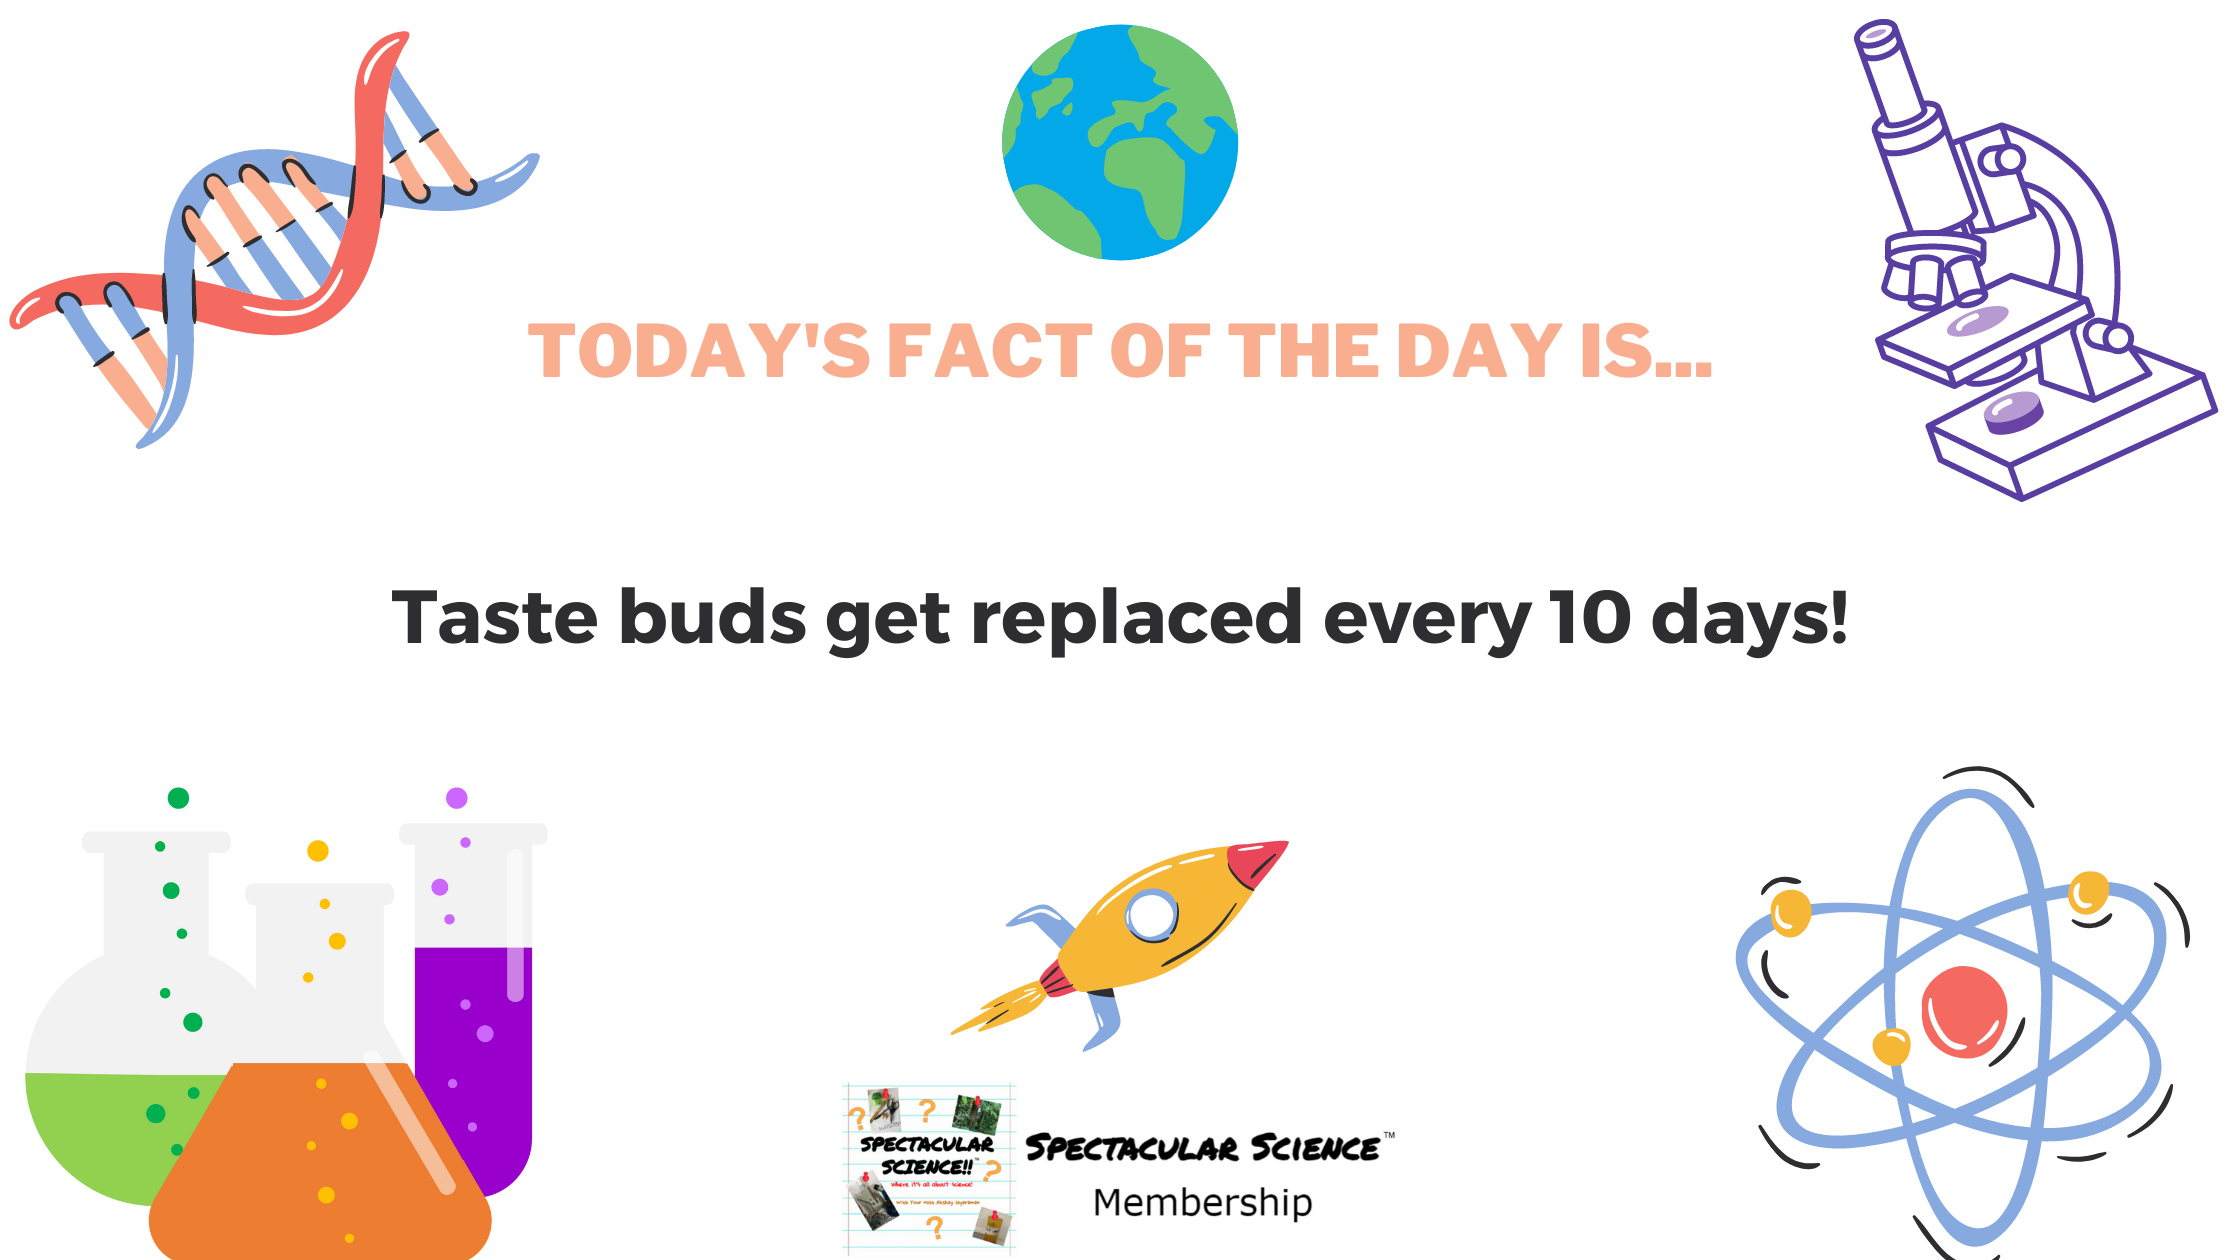 Fact of the Day Image Apr. 8th